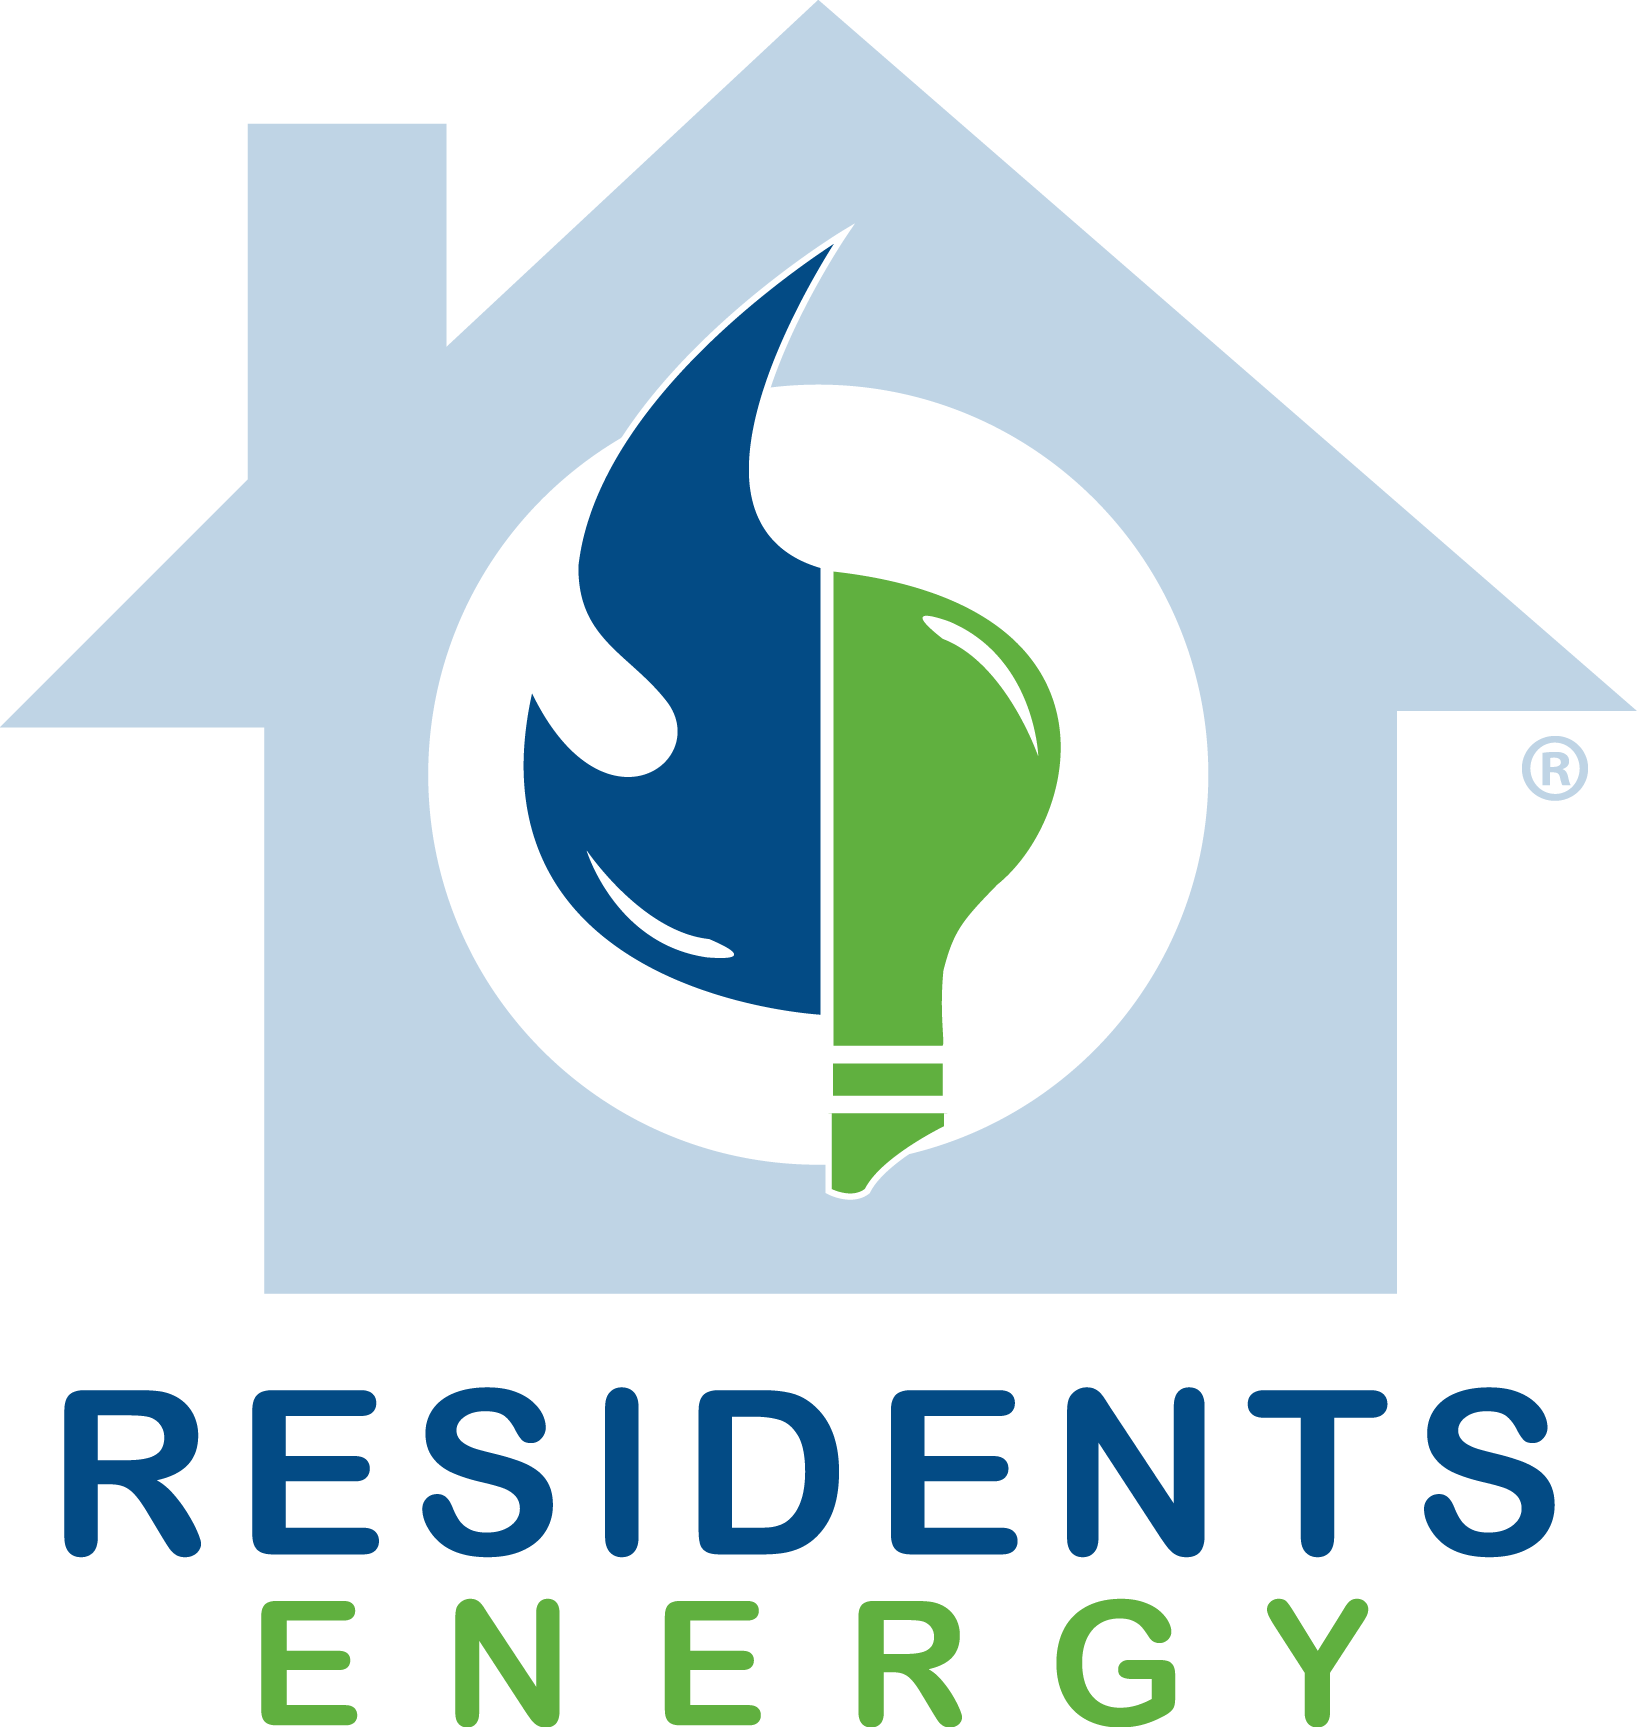 Click to see details for Residents Energy, LLC offer. Price 0.599